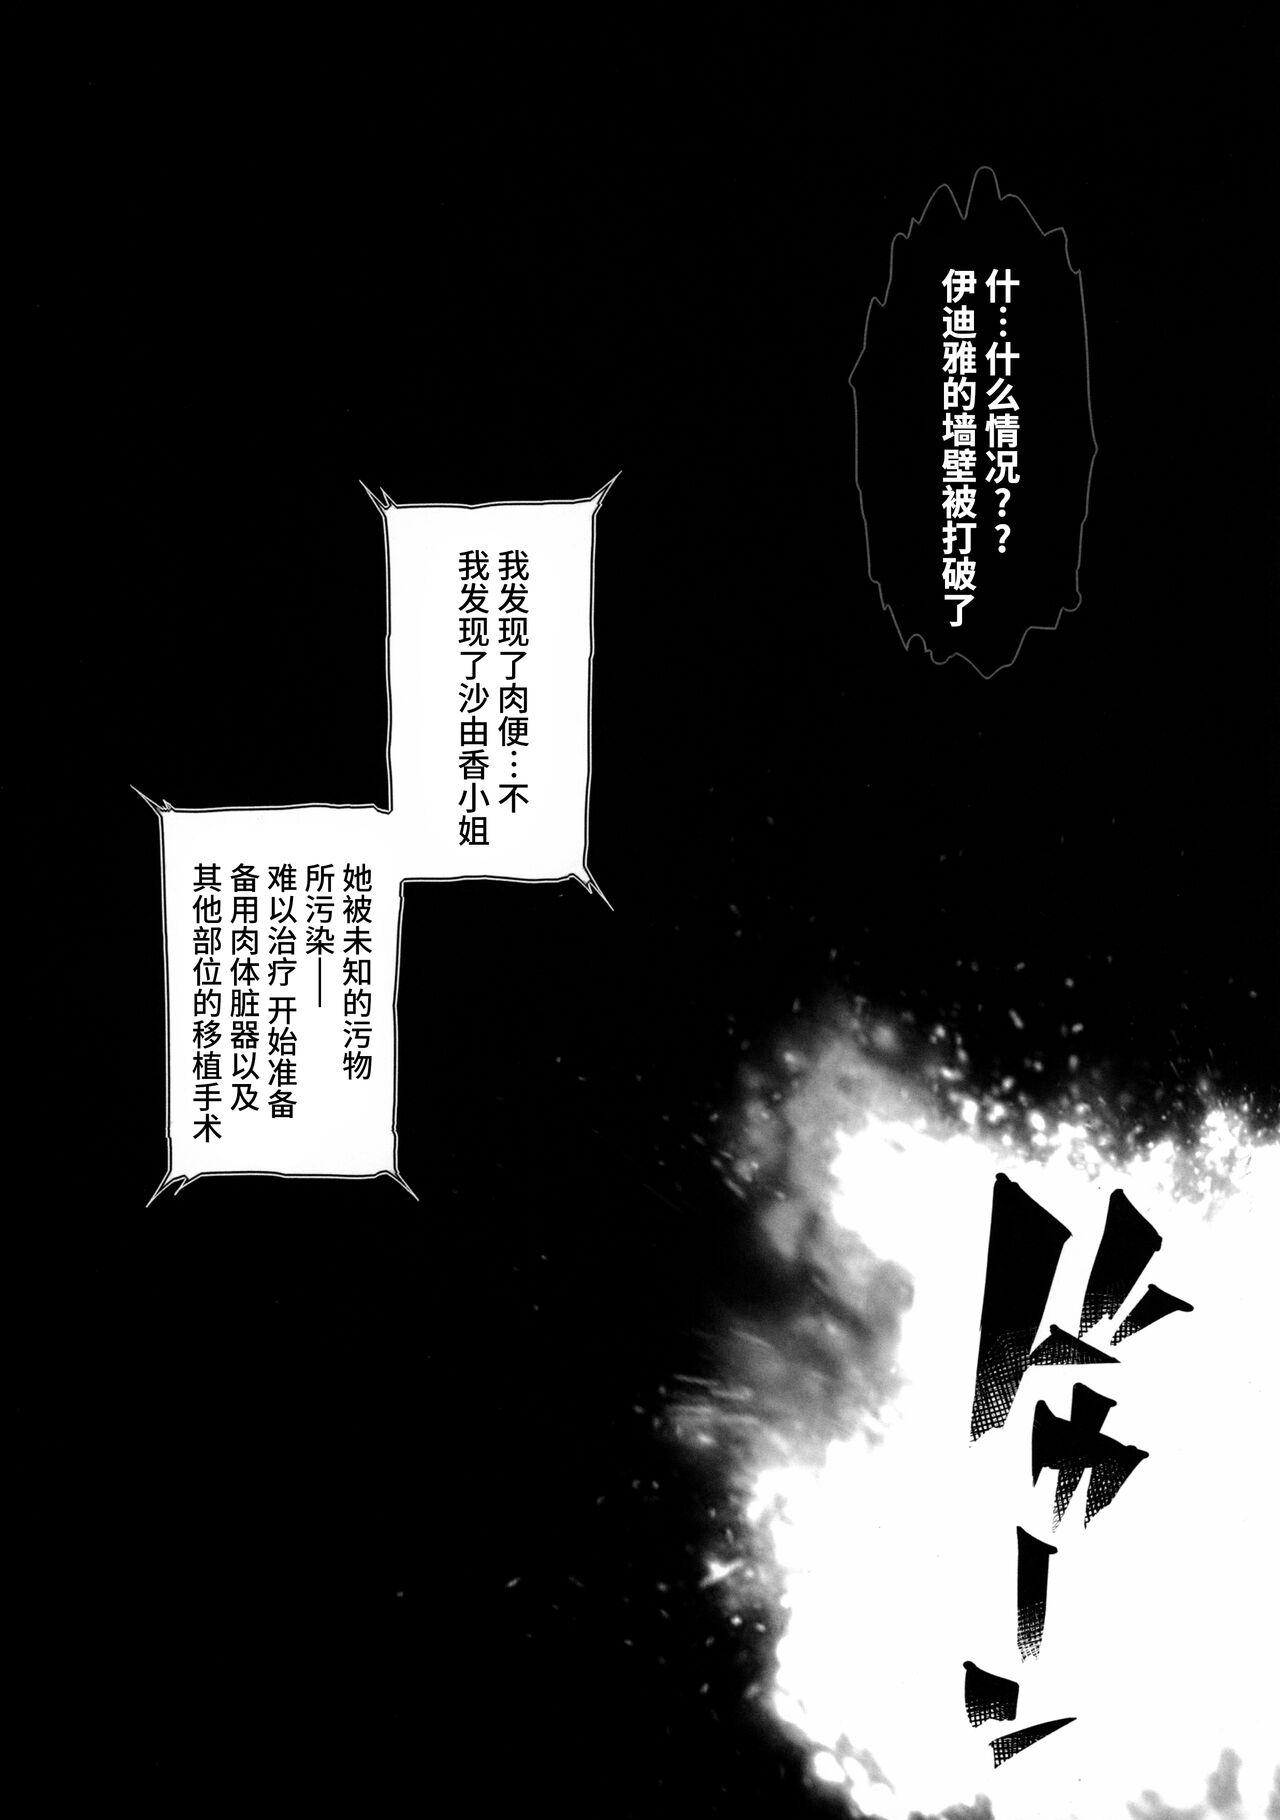 Bulge (SC2021 Spring) [ONEGROSS (144)] Choukou Inbou -Beat inflation- LV2 (Choukou Tenshi Escalayer)[Chinese][可乐不咕鸟联合汉化] - Choukou tenshi escalayer Beauty - Page 8